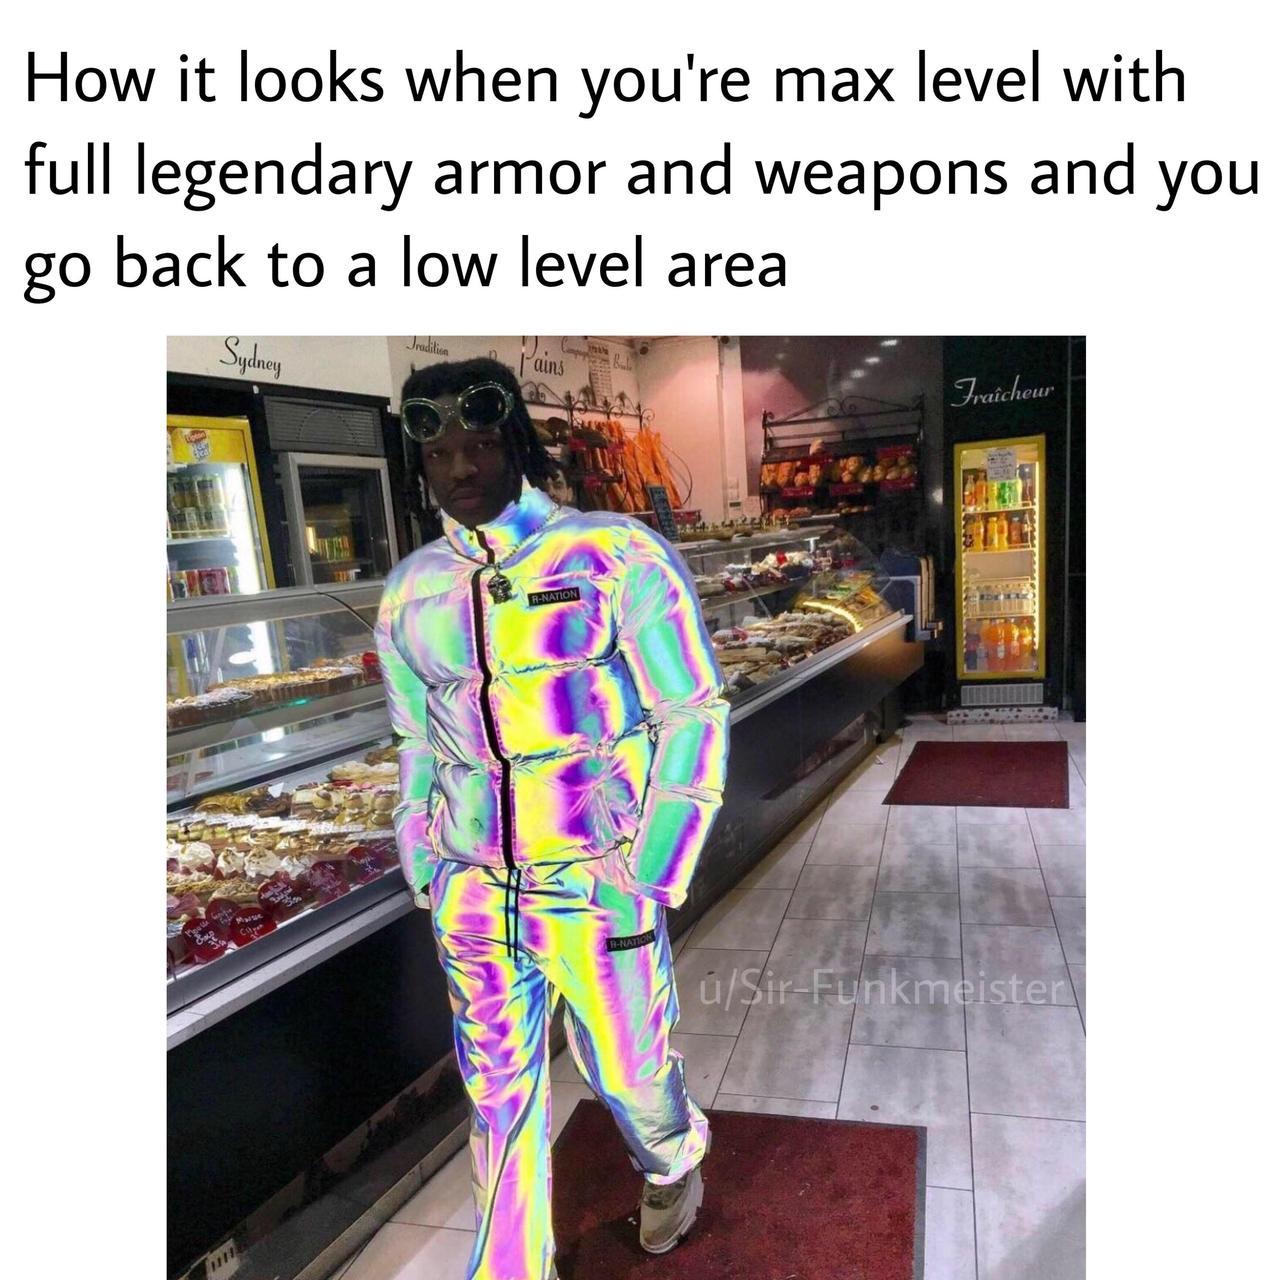 funny gaming memes - obama drip - How it looks when you're max level with full legendary armor and weapons and you go back to a low level area Jradita Sydney Pains Fracheur RNation SirFunkmeister